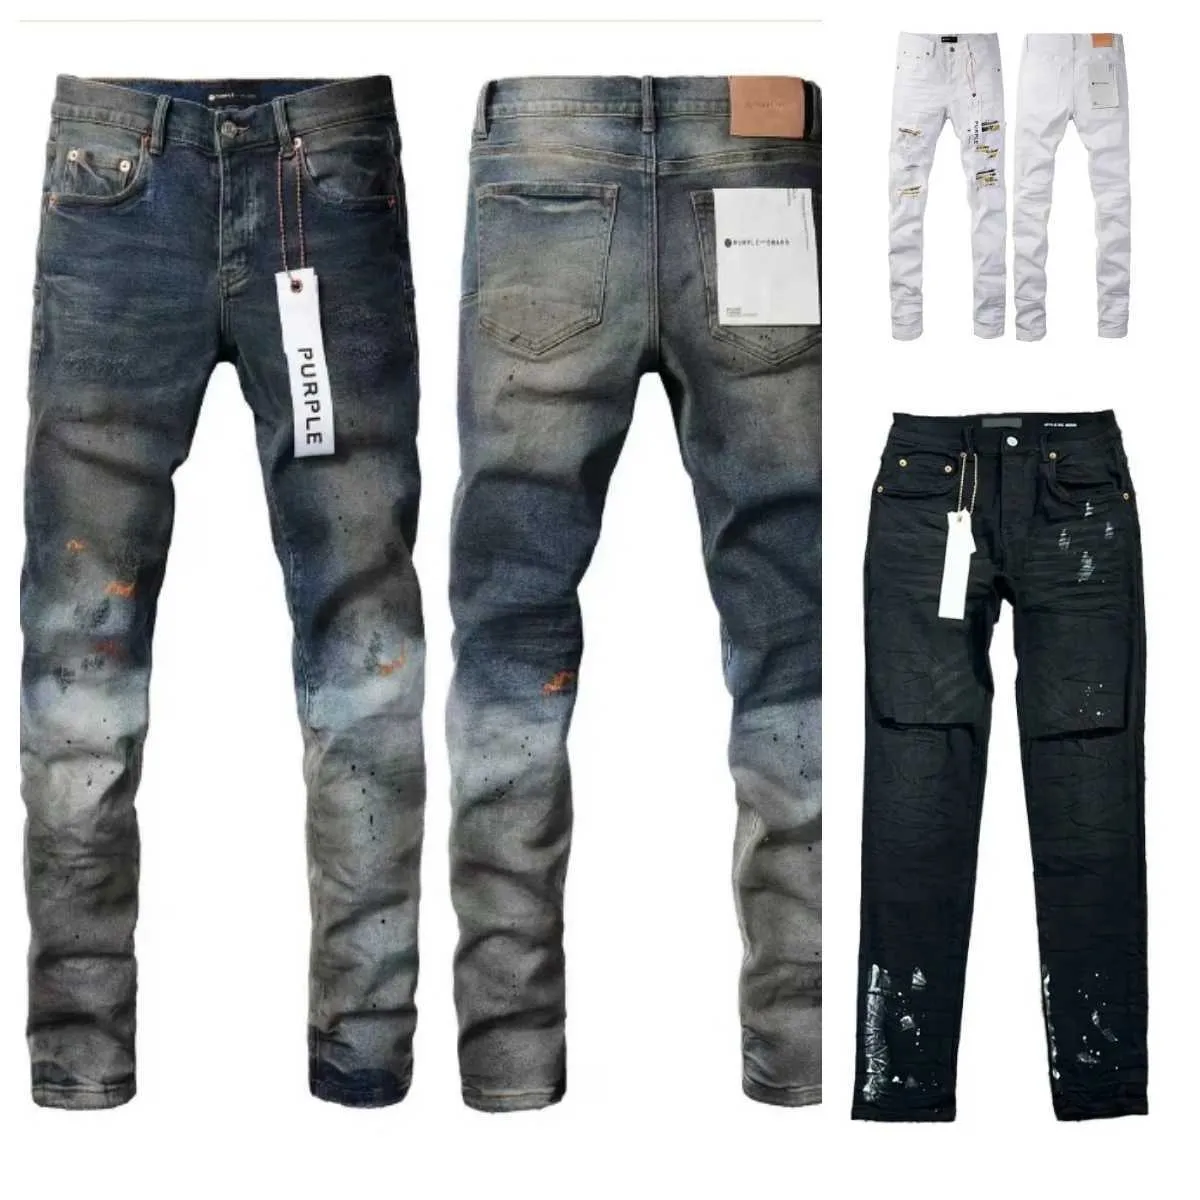 Mens Purple Designer Jeans Hole Motorcycle Skinny Chic Ripped Patchwork Fashion Street High Street New Hip Hop Wash Made Oldj4pnbgth